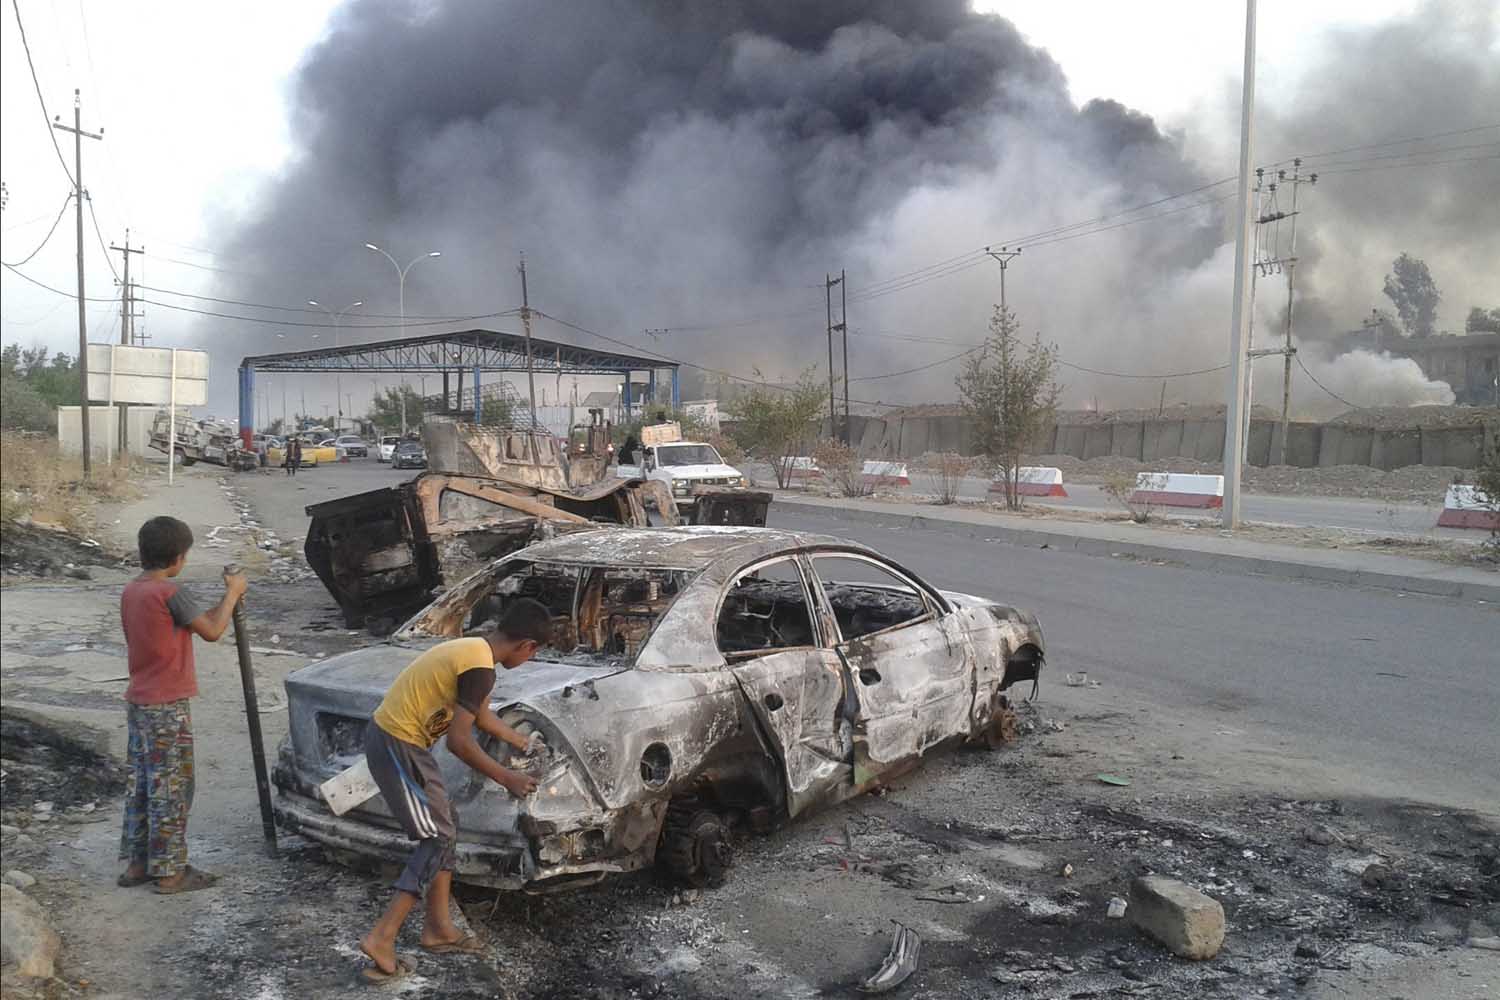 Civilian children stand next to a burnt vehicle during clashes between Iraqi security forces and al Qaeda-linked Islamic State in Iraq and the Levant (ISIL) in the northern Iraq city of Mosul